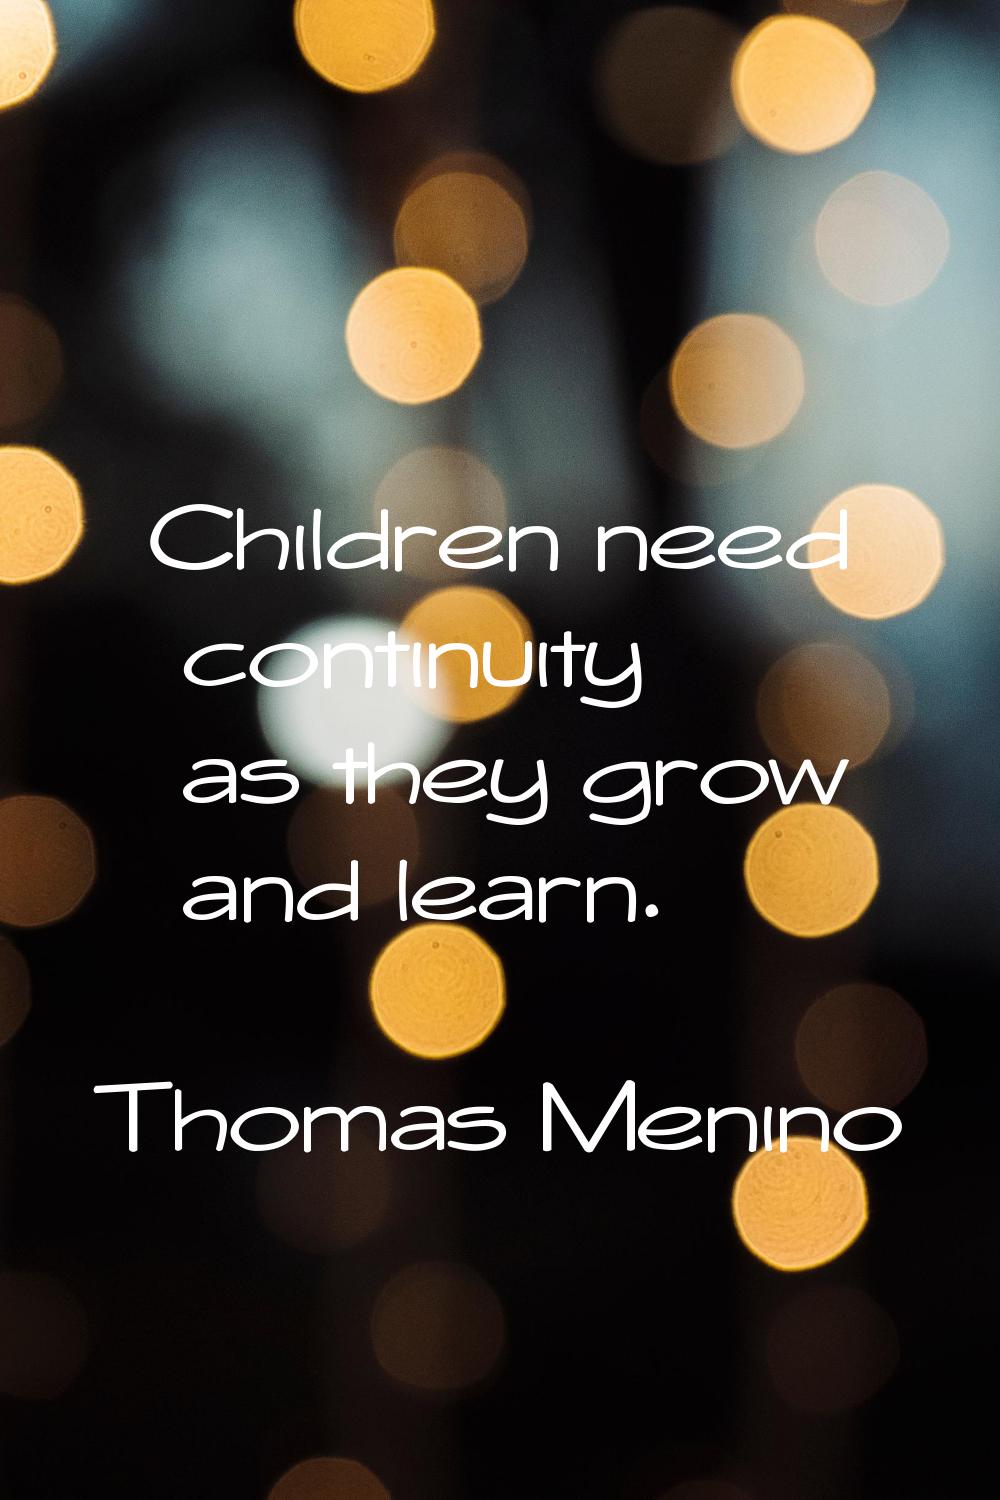 Children need continuity as they grow and learn.